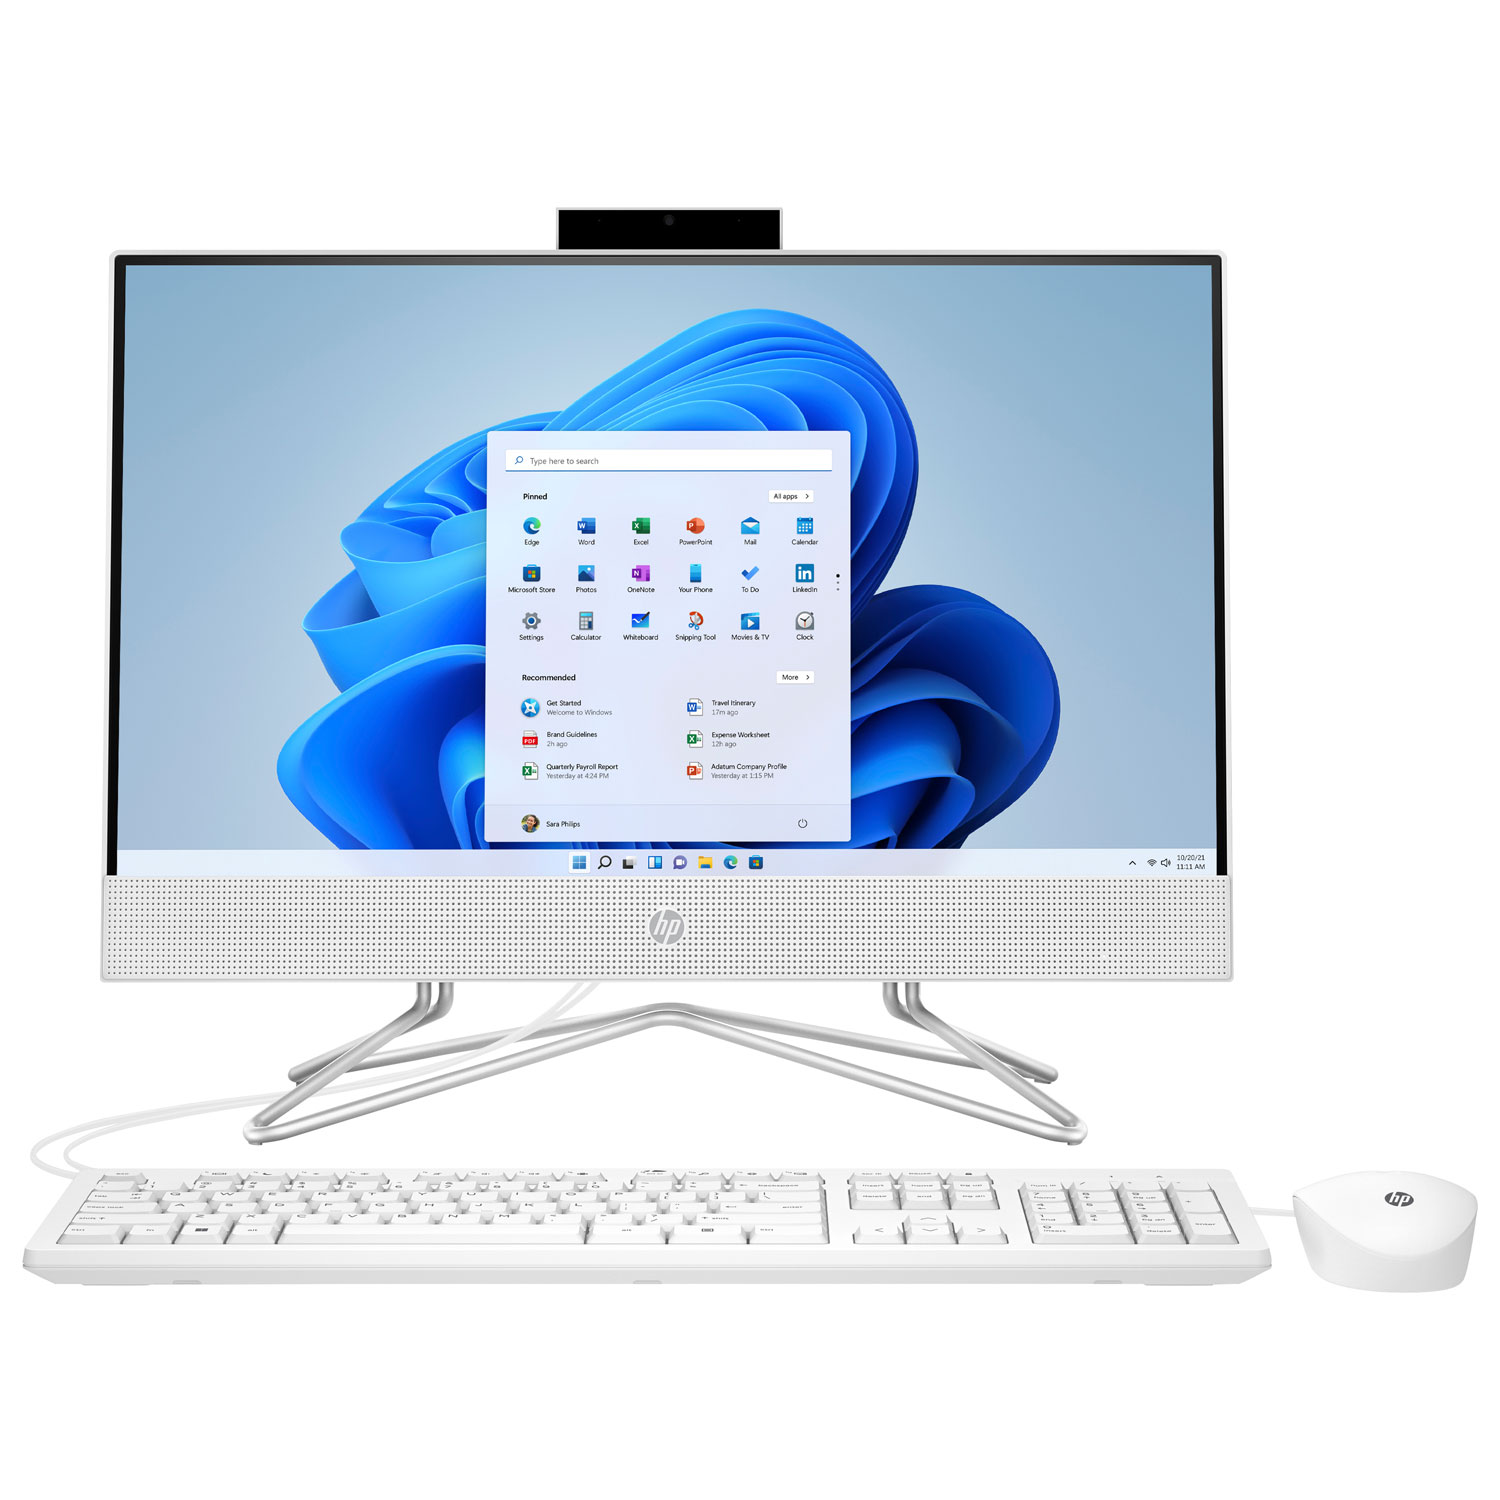 HP All-in-One PC (Intel Pentium Silver J5040/128GB SSD/8GB RAM/Windows 11) - Only at Best Buy